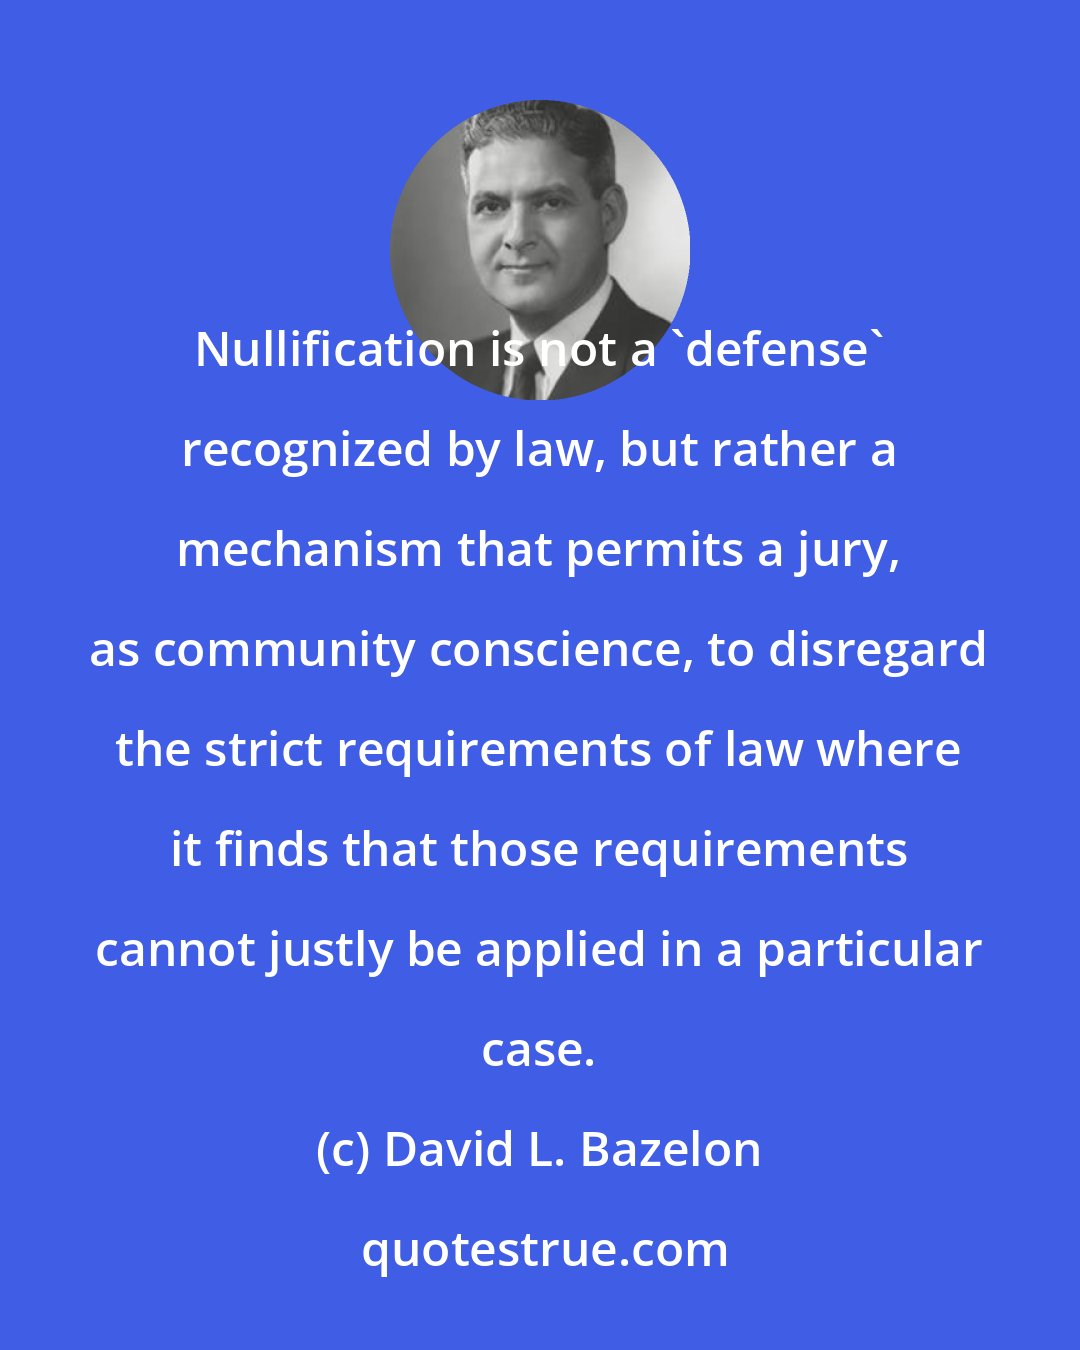 David L. Bazelon: Nullification is not a 'defense' recognized by law, but rather a mechanism that permits a jury, as community conscience, to disregard the strict requirements of law where it finds that those requirements cannot justly be applied in a particular case.